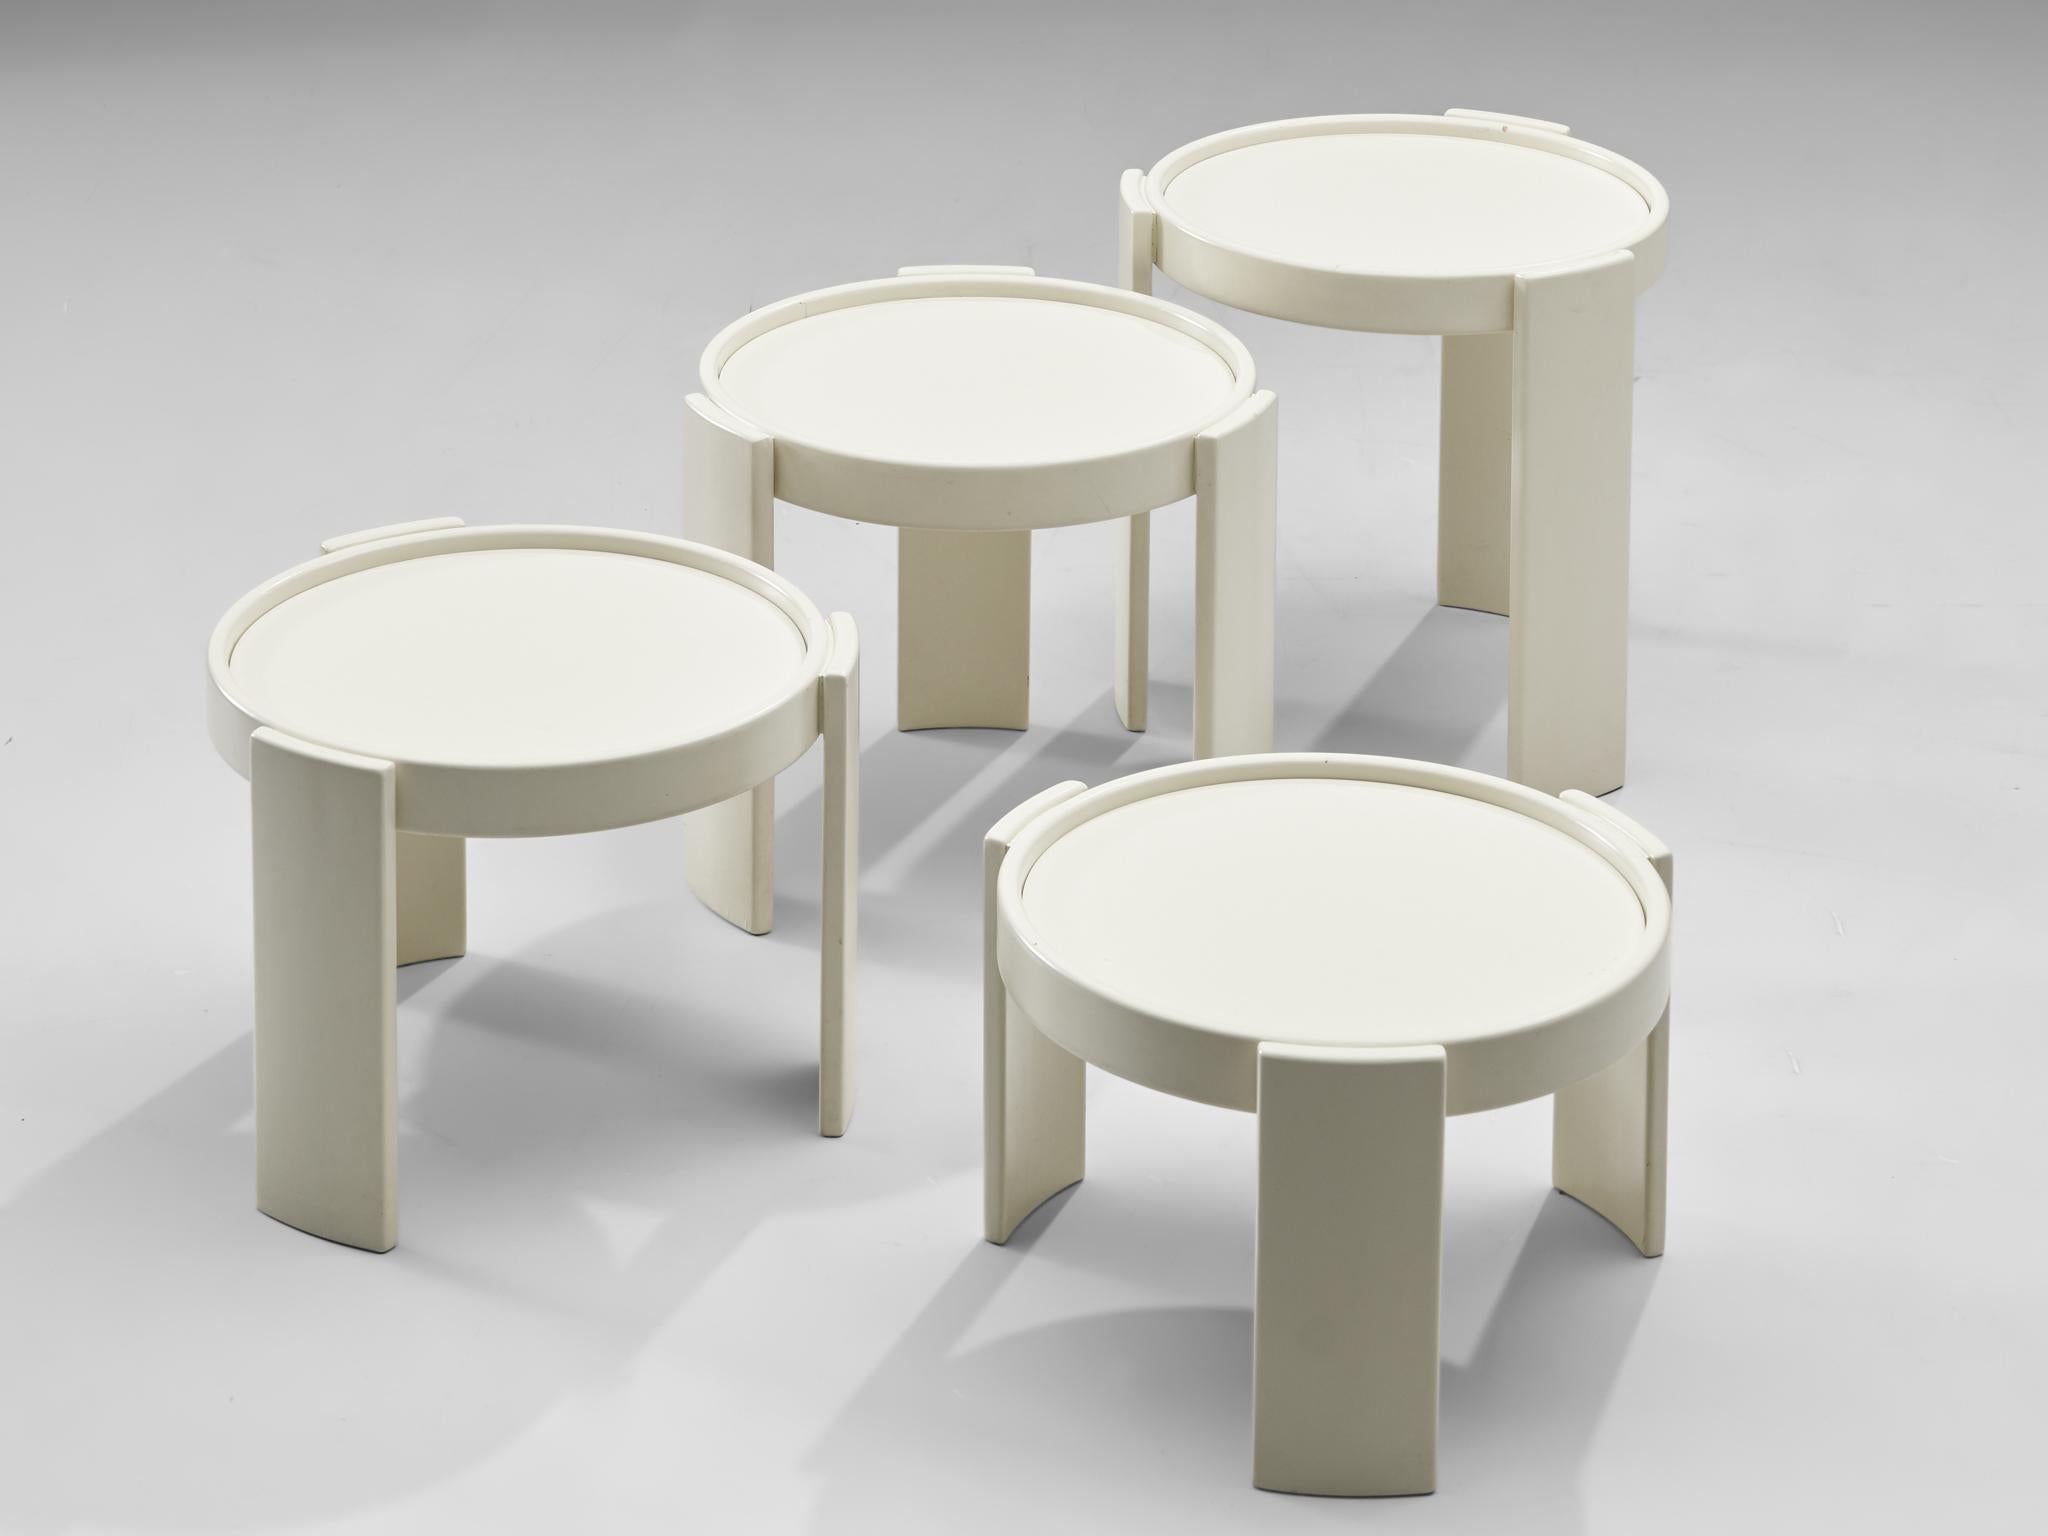 Gianfranco Frattini for Cassina, nesting table, white lacquered wood, Italy, 1960s

Nesting tables, consists of four pieces, designed by Gianfranco Frattini for Cassina. All the tables are white lacquered wood, round shaped and different heights,